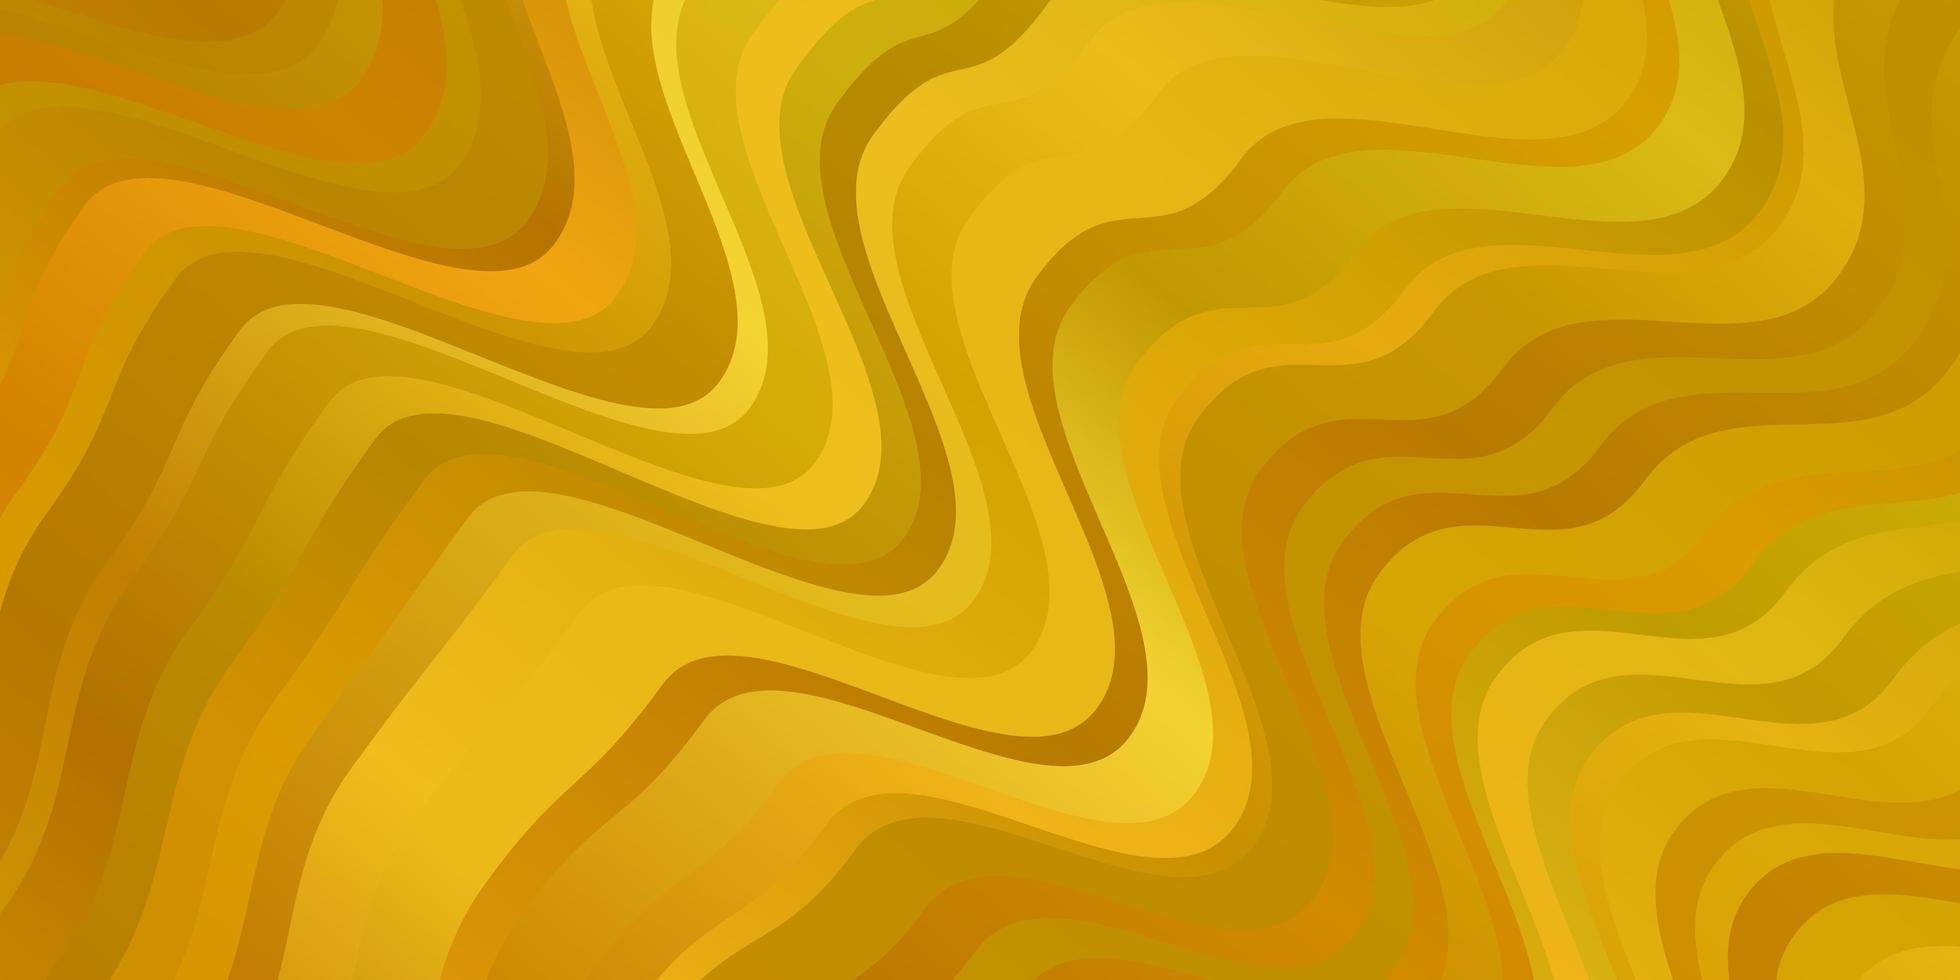 Dark Yellow vector pattern with curves